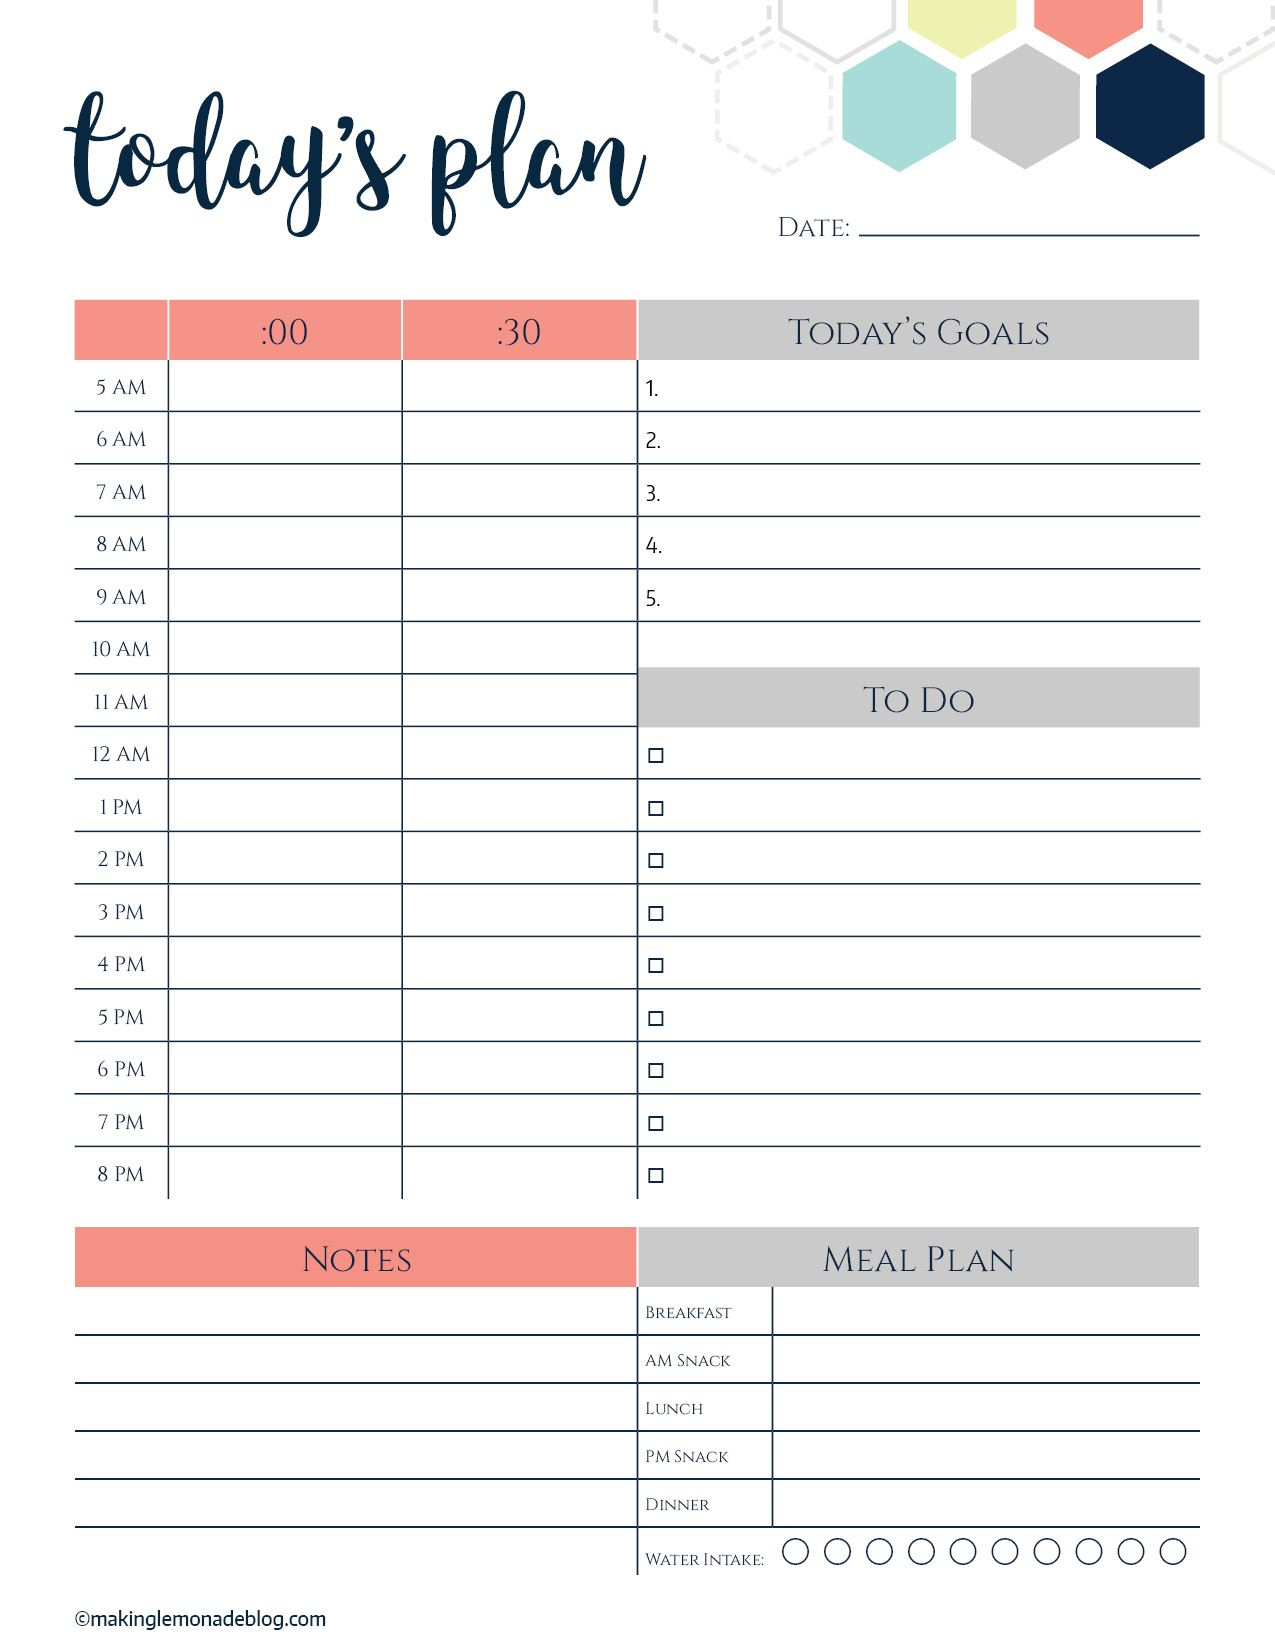 This Free Printable Daily Planner Changes Everything. Finally A Way - Free Printable Daily Planner 2017